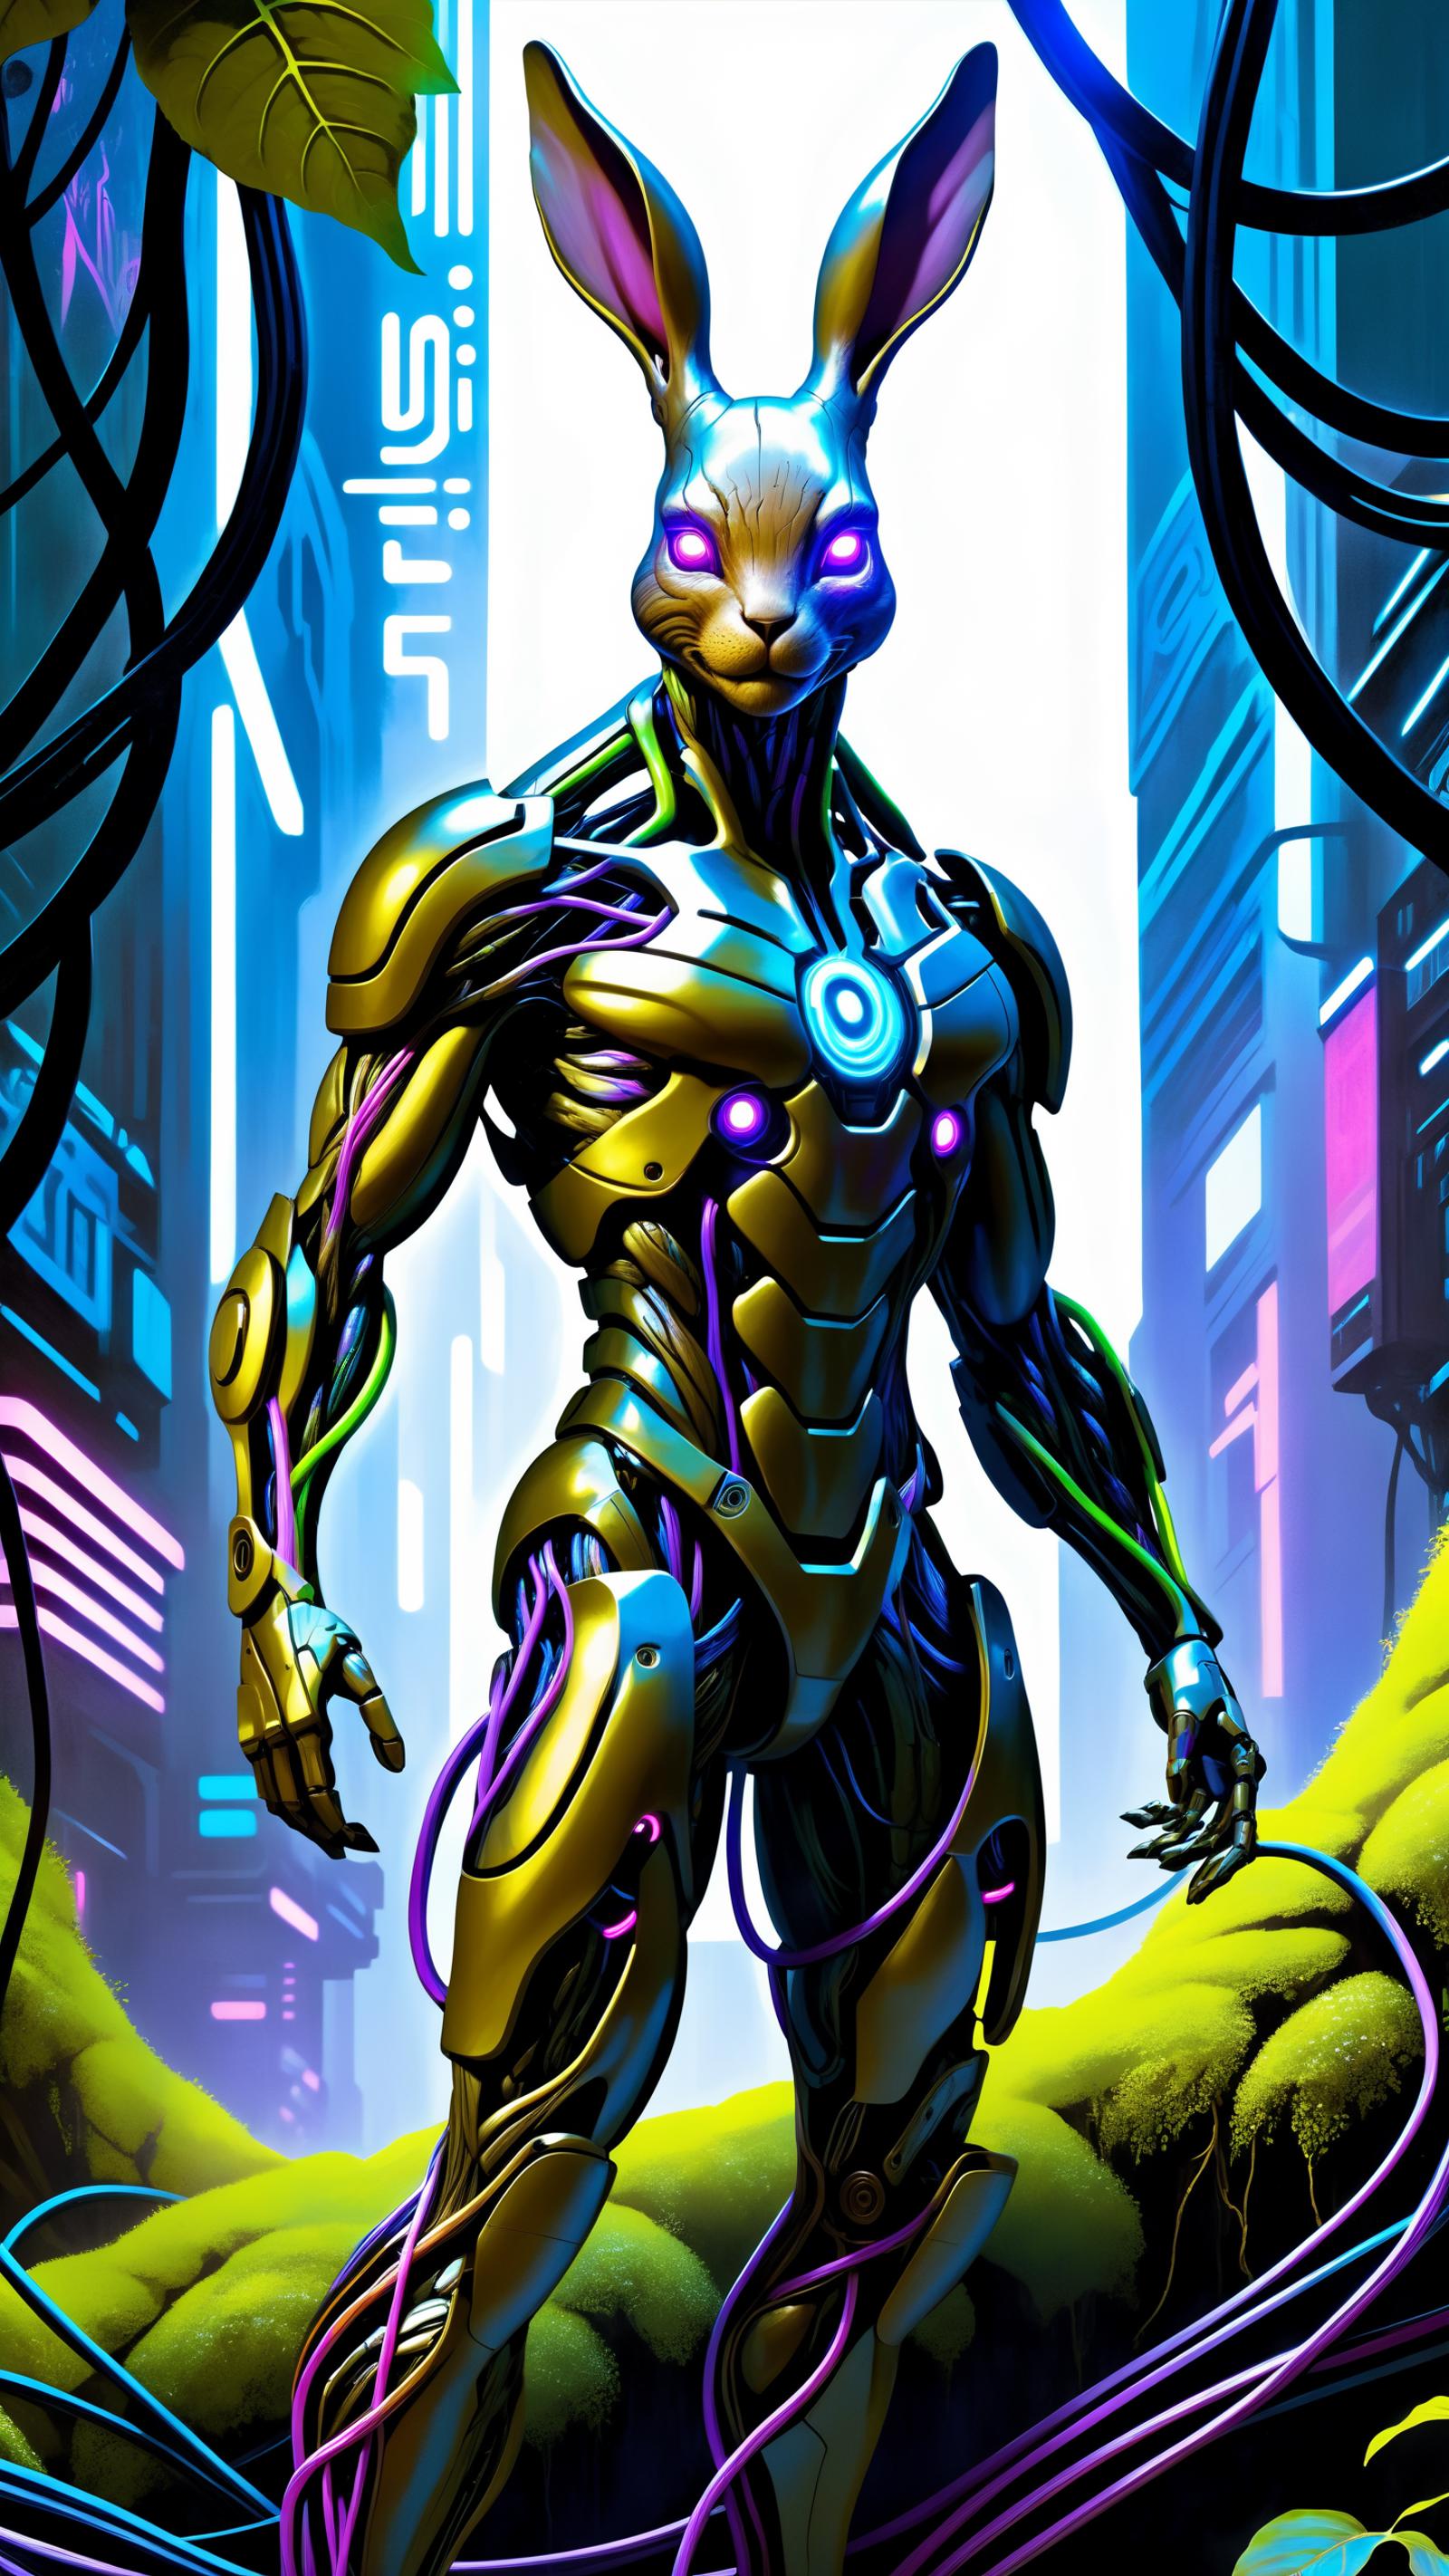 A futuristic robot wearing a gold outfit, standing in a city with purple lights.